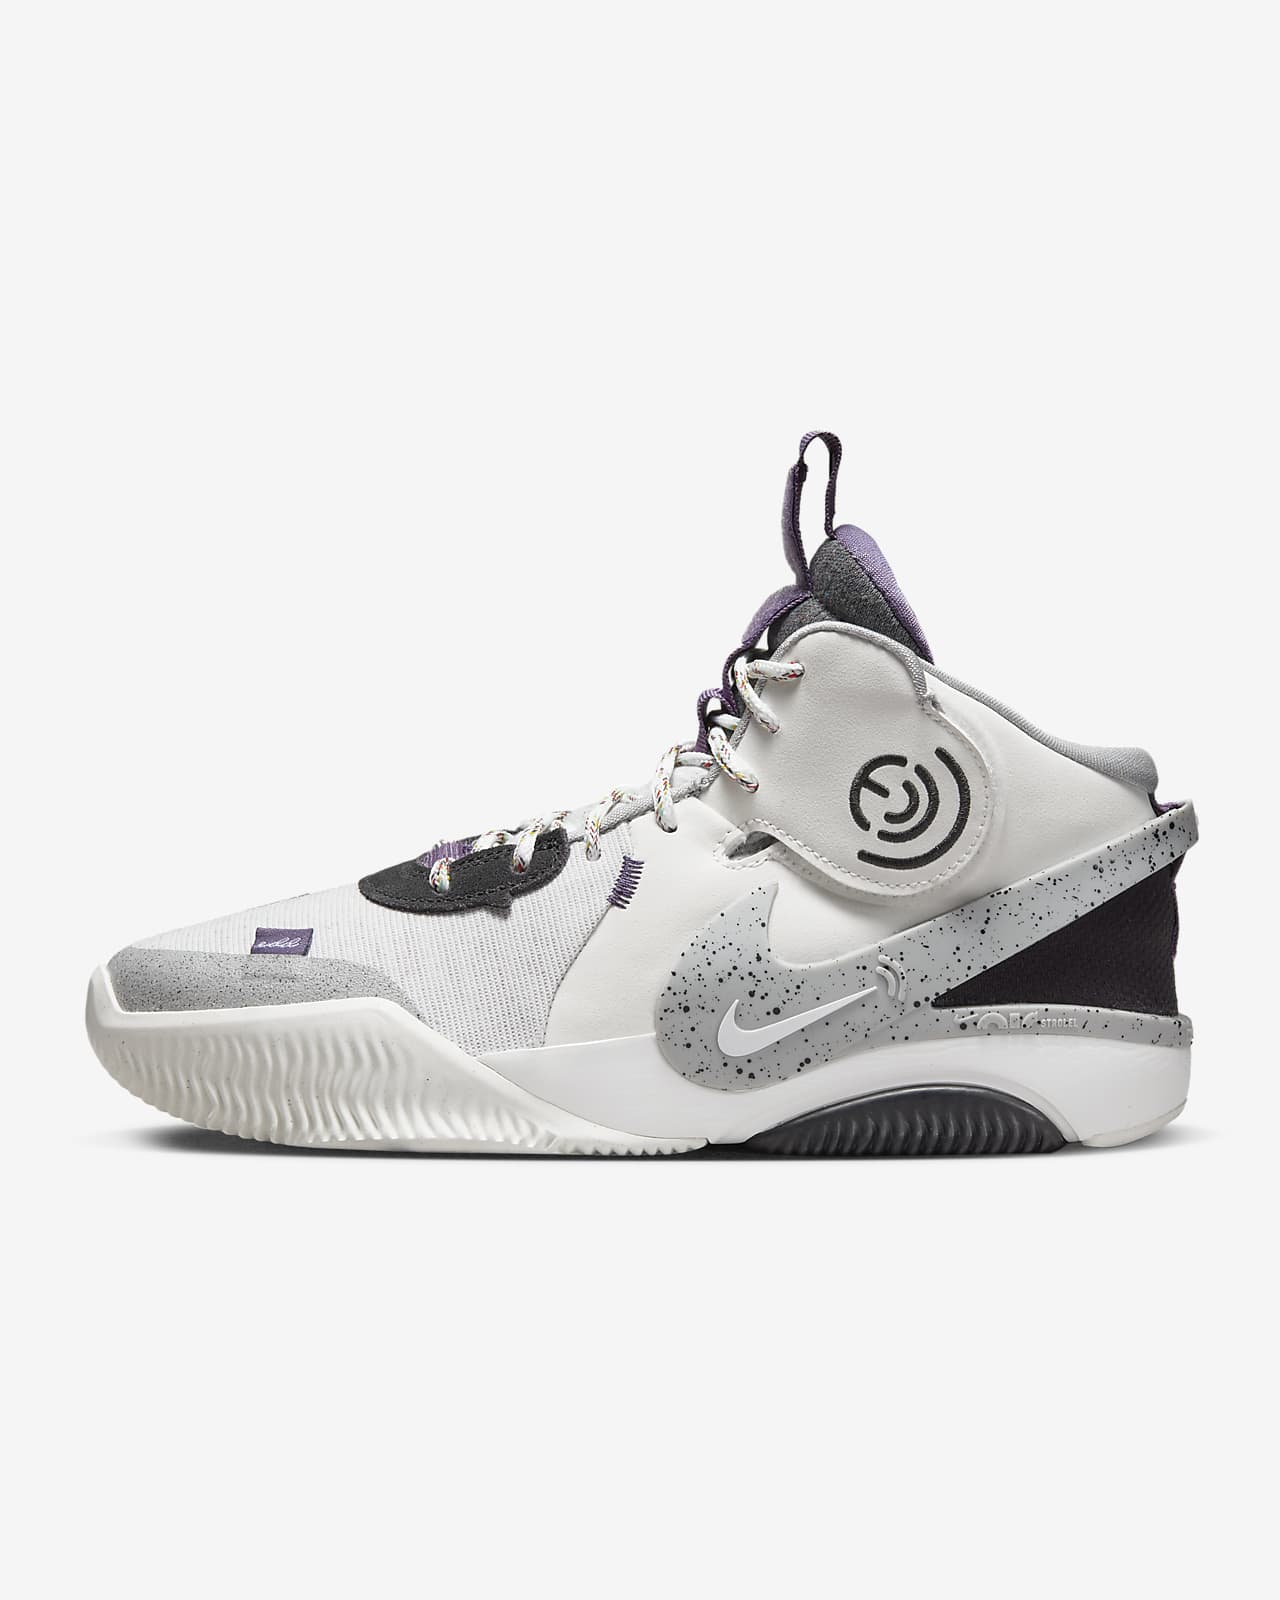 Nike Air Deldon 'Together We Fly' Basketball Shoes